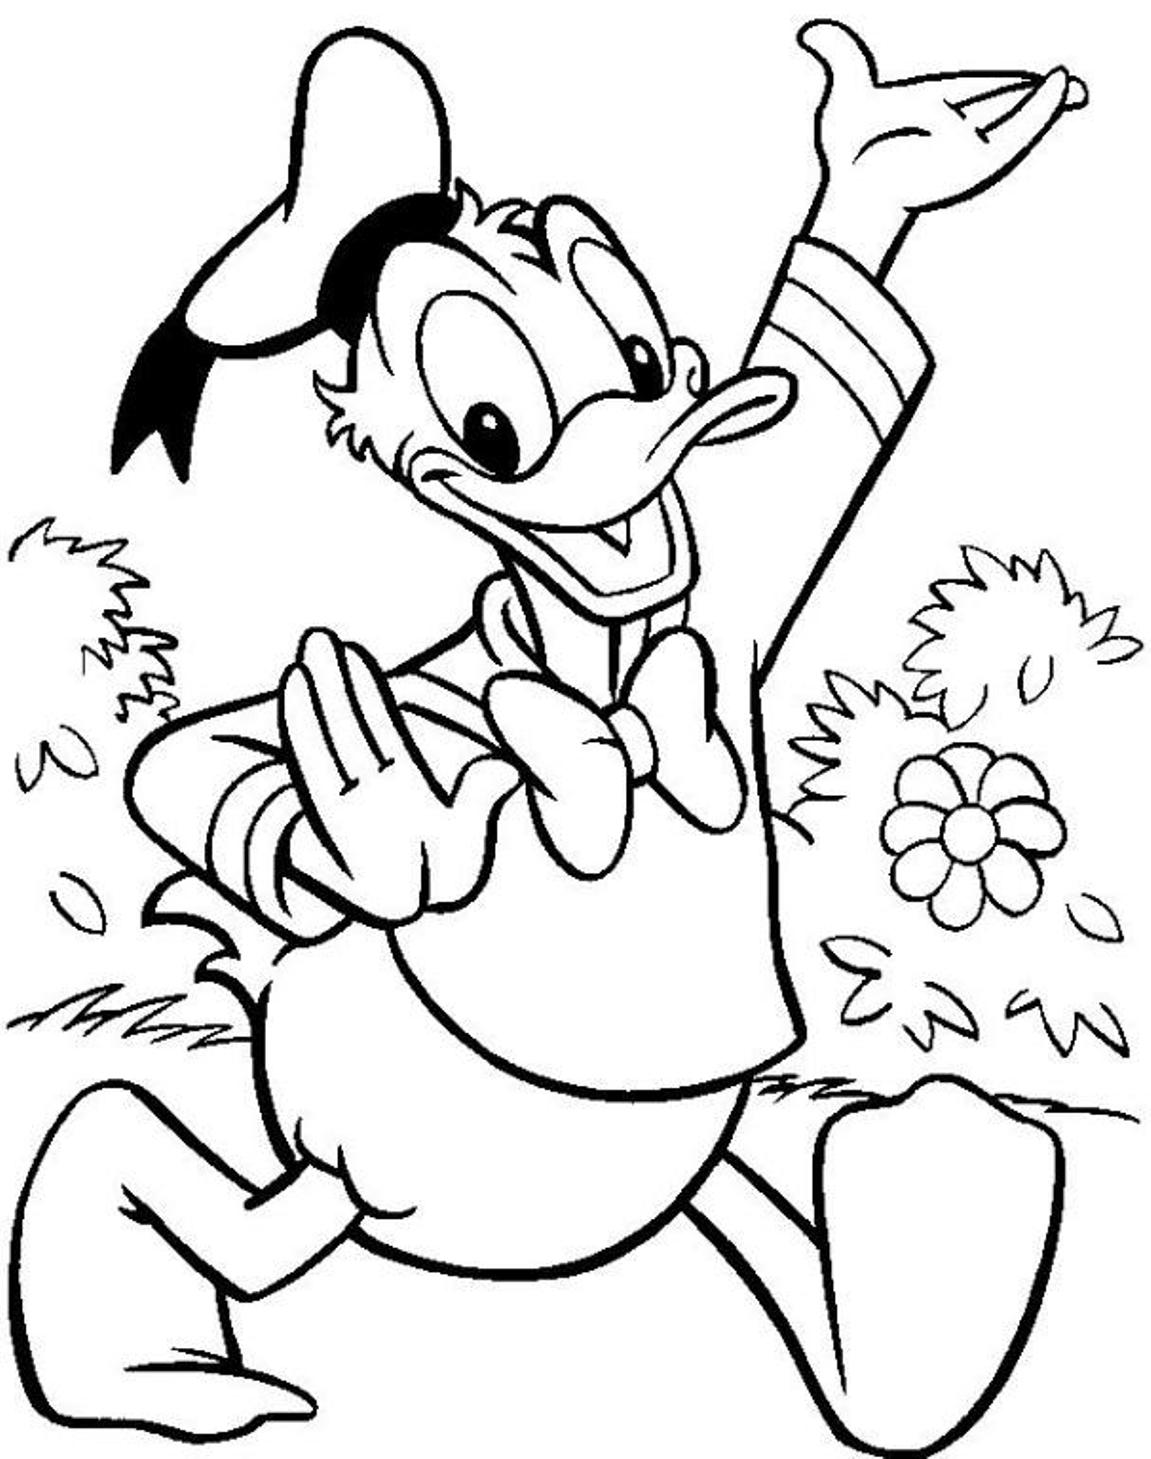 hilarious-activities-of-funny-duck-20-donald-duck-coloring-pages-free